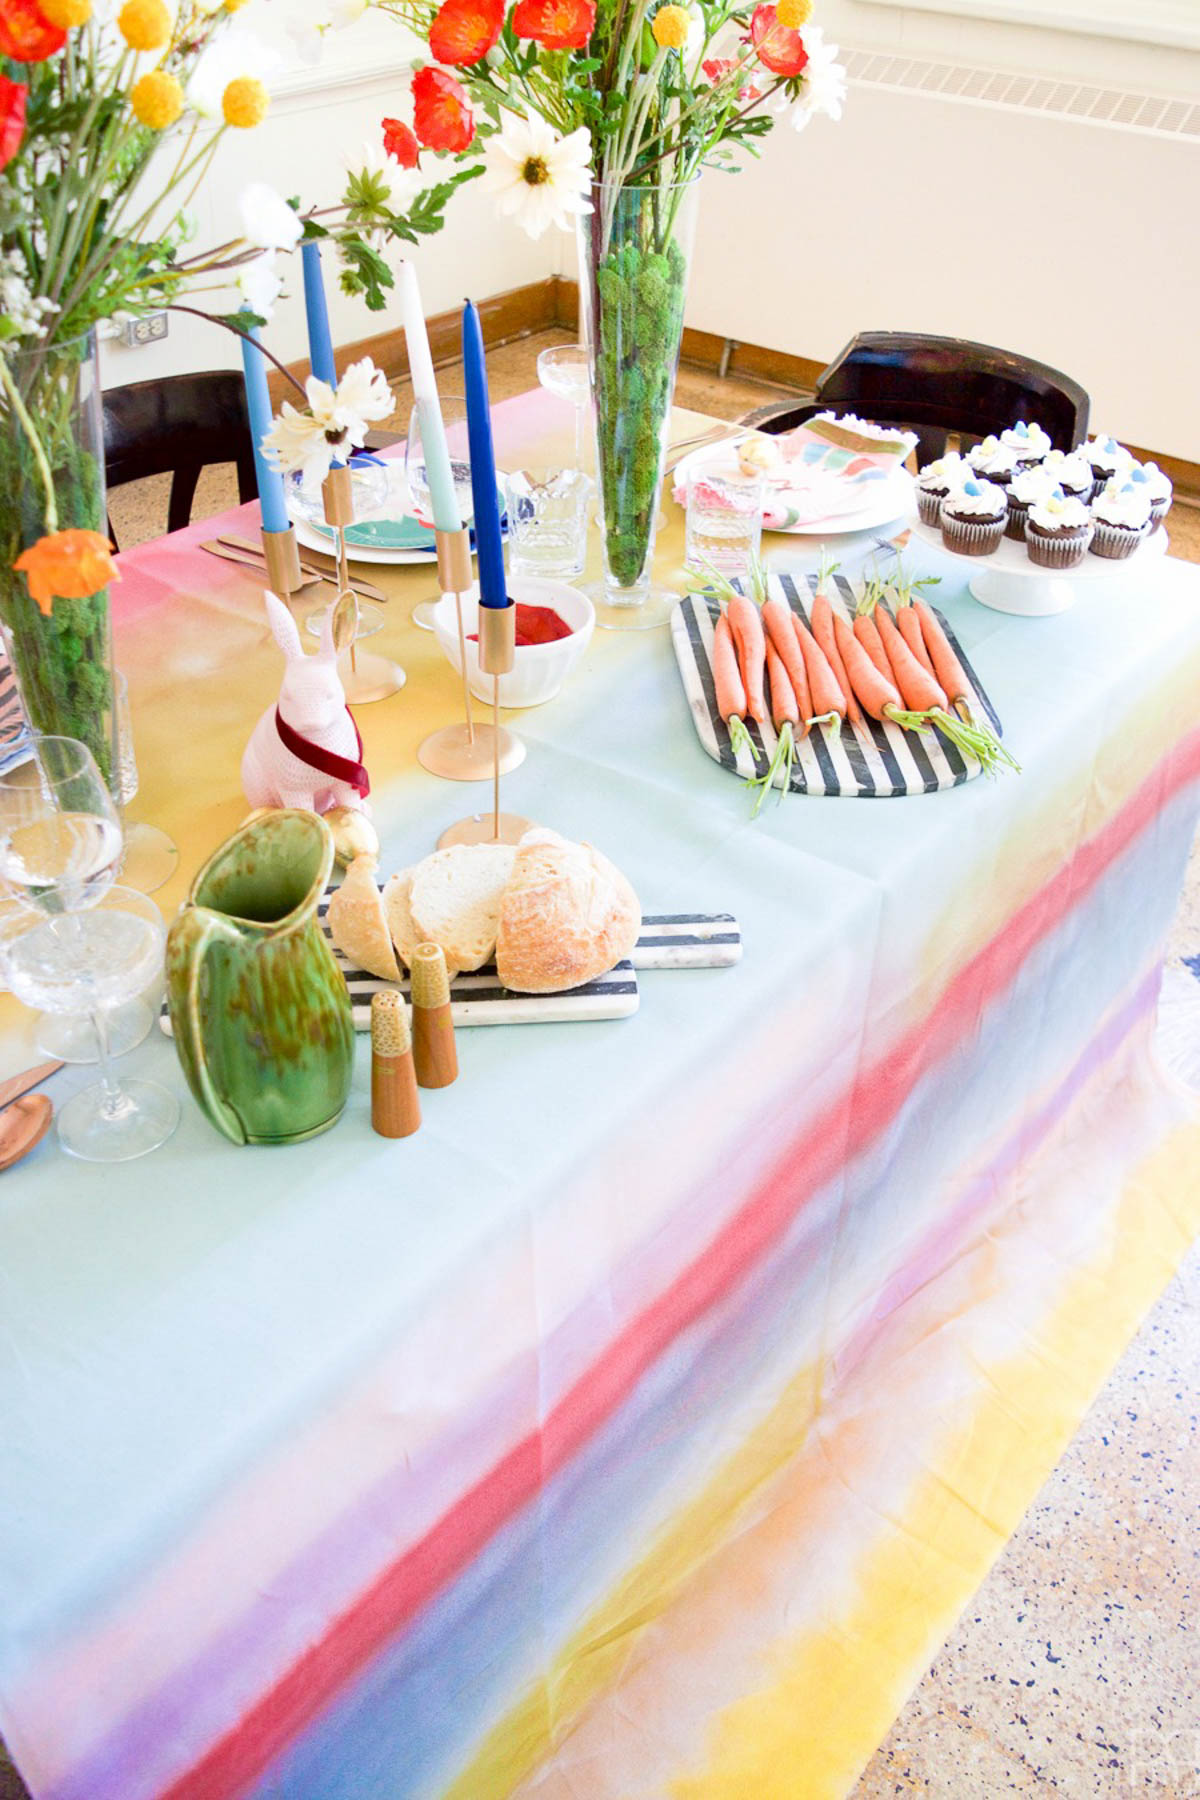 tablecloth spray painted with ombre effect 